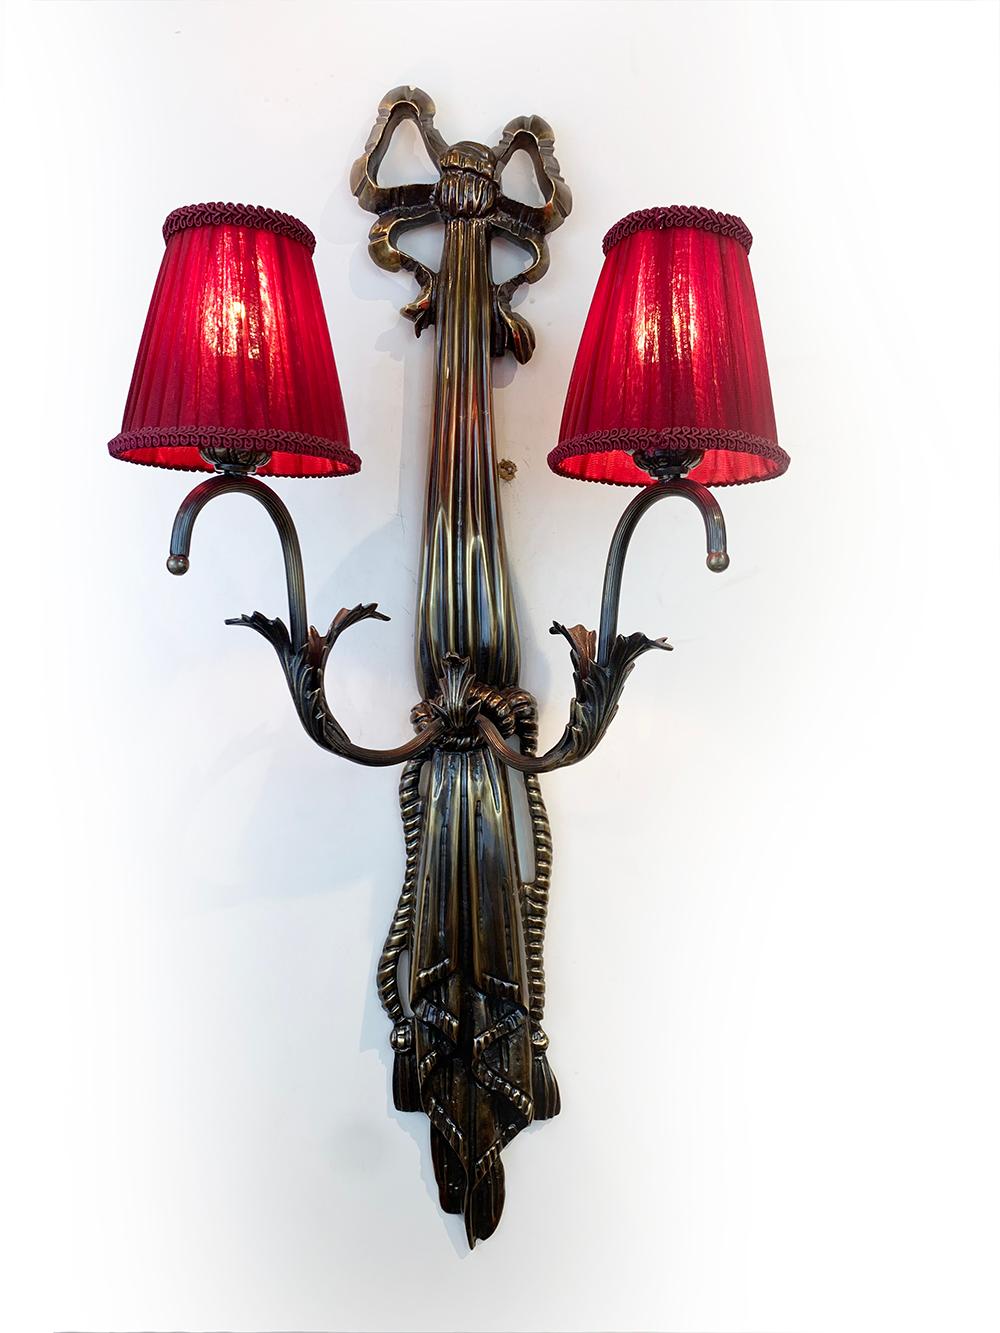 Pair of French Art Deco wall lights consists of a vertical bronze structure having beautiful motif design with two curved arms of lights supporting two pleated “bistro” shape lampshades in dark red linen fabric. Lovely when the lights on.
Each item